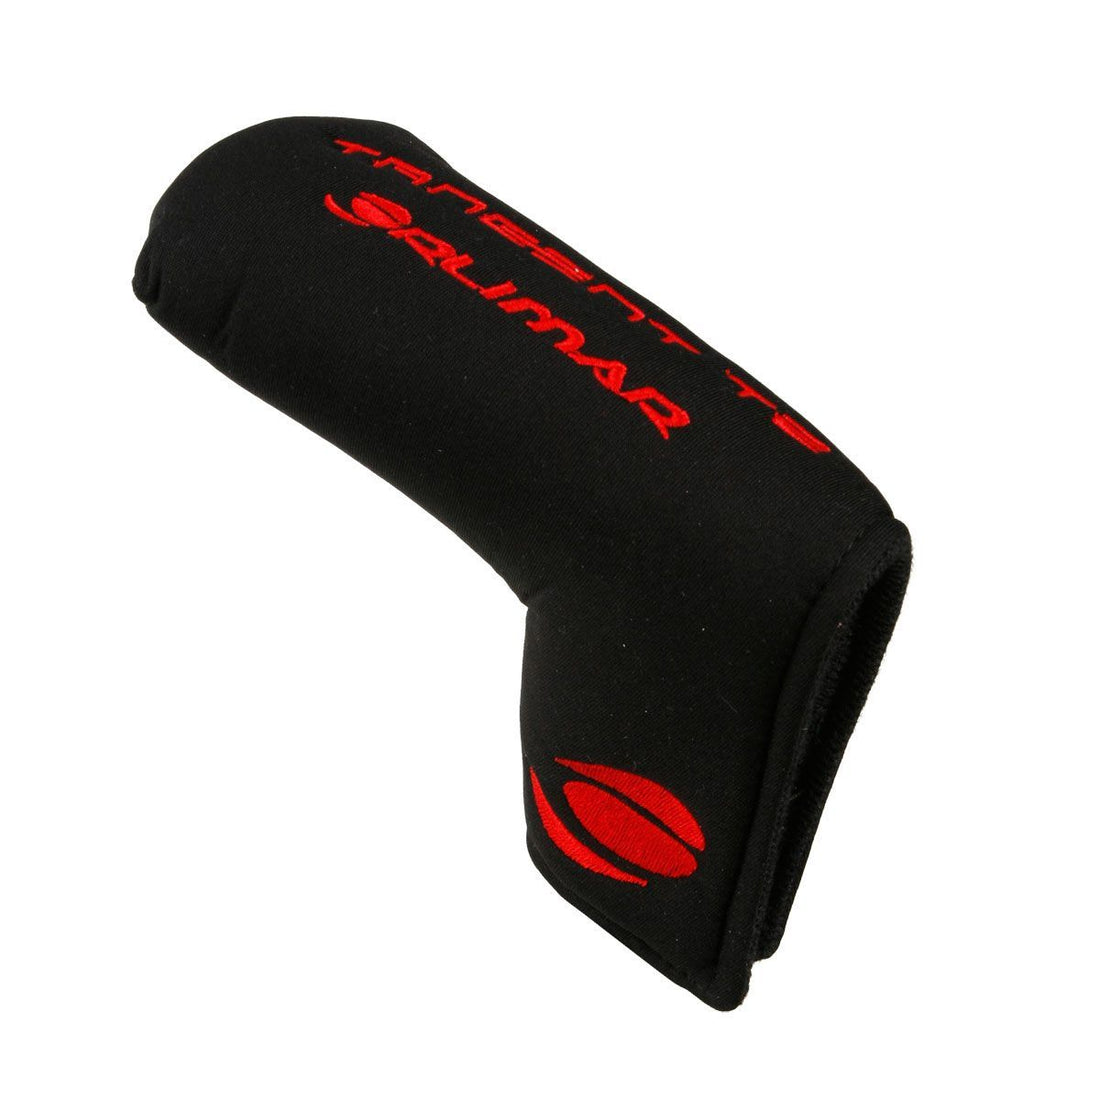 black putter head cover with Tangent, Orlimar and the Orlimar logo embroidered in red